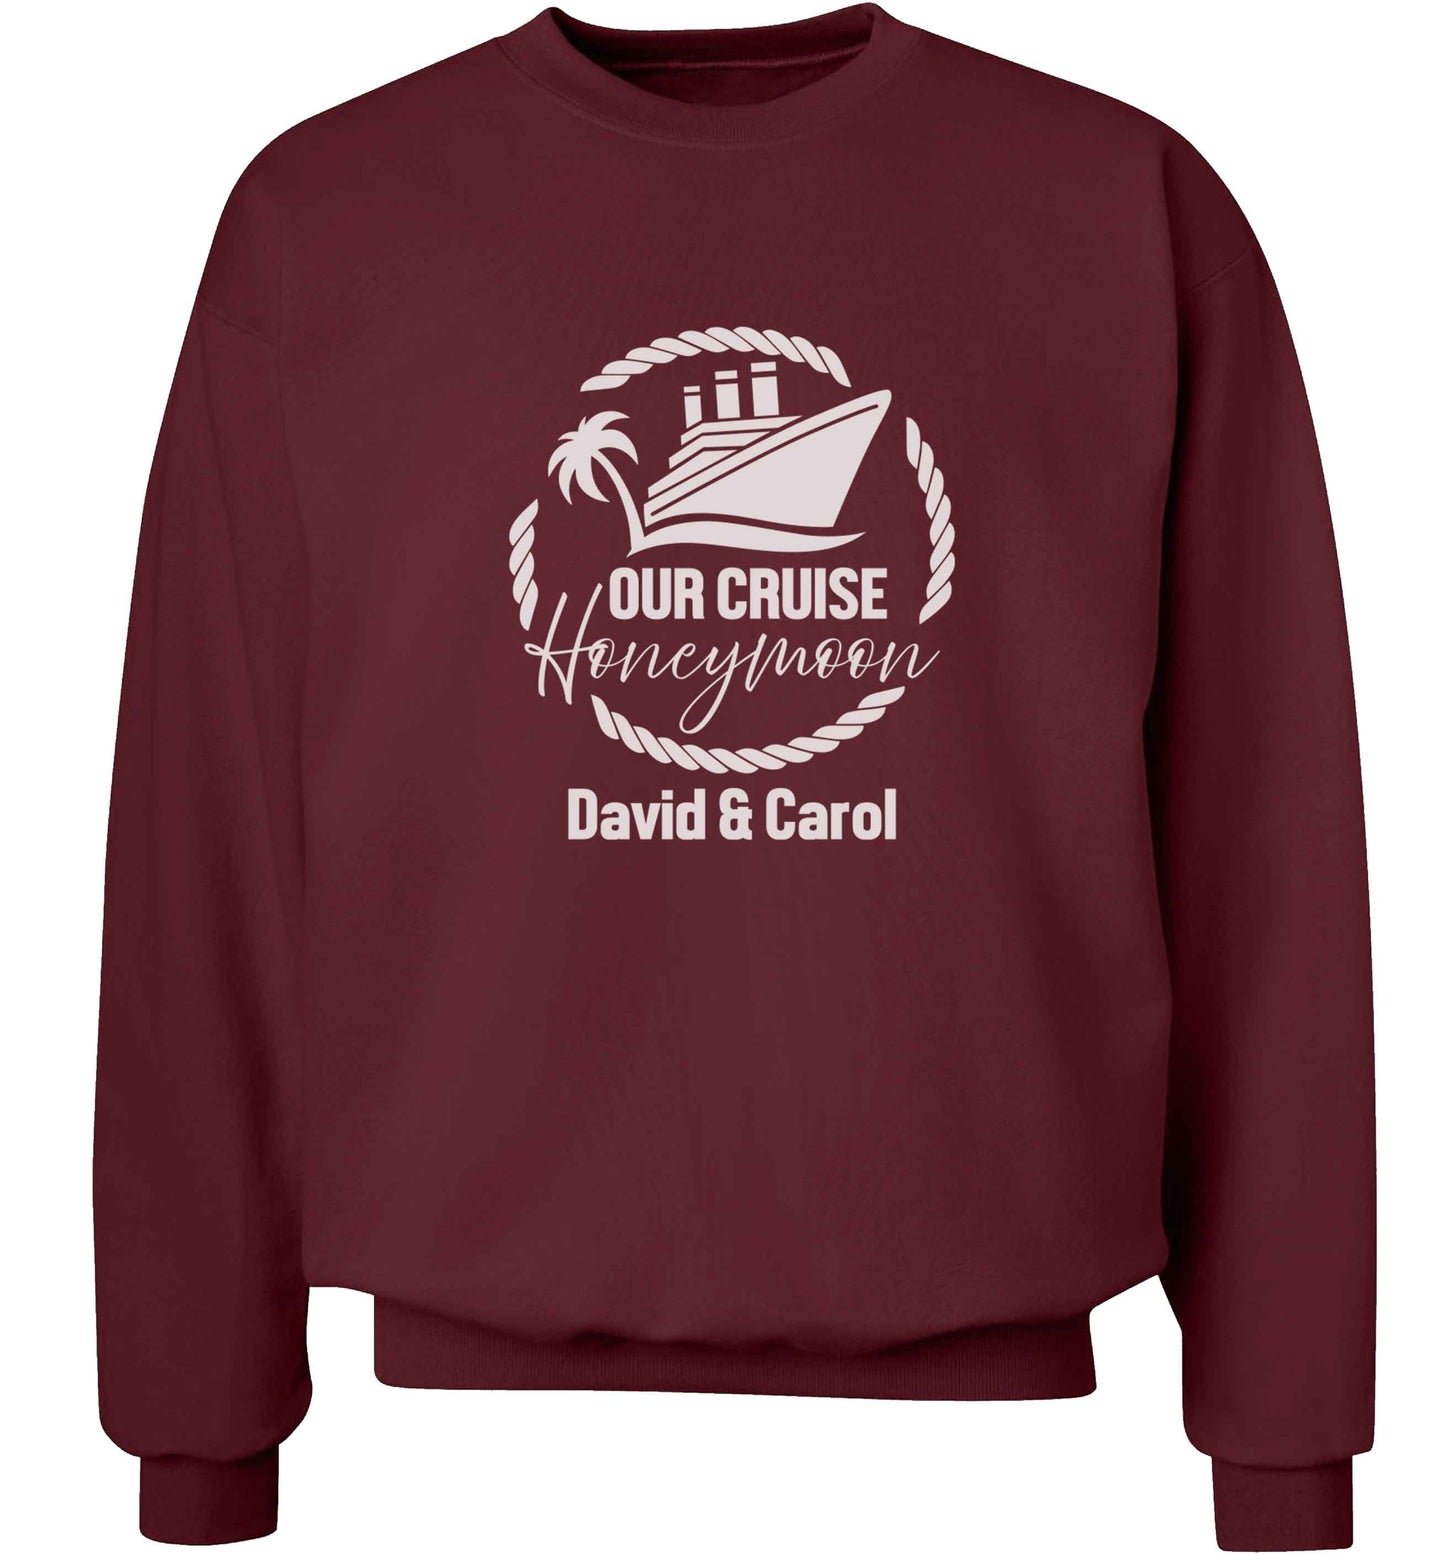 Our cruise honeymoon personalised adult's unisex maroon sweater 2XL